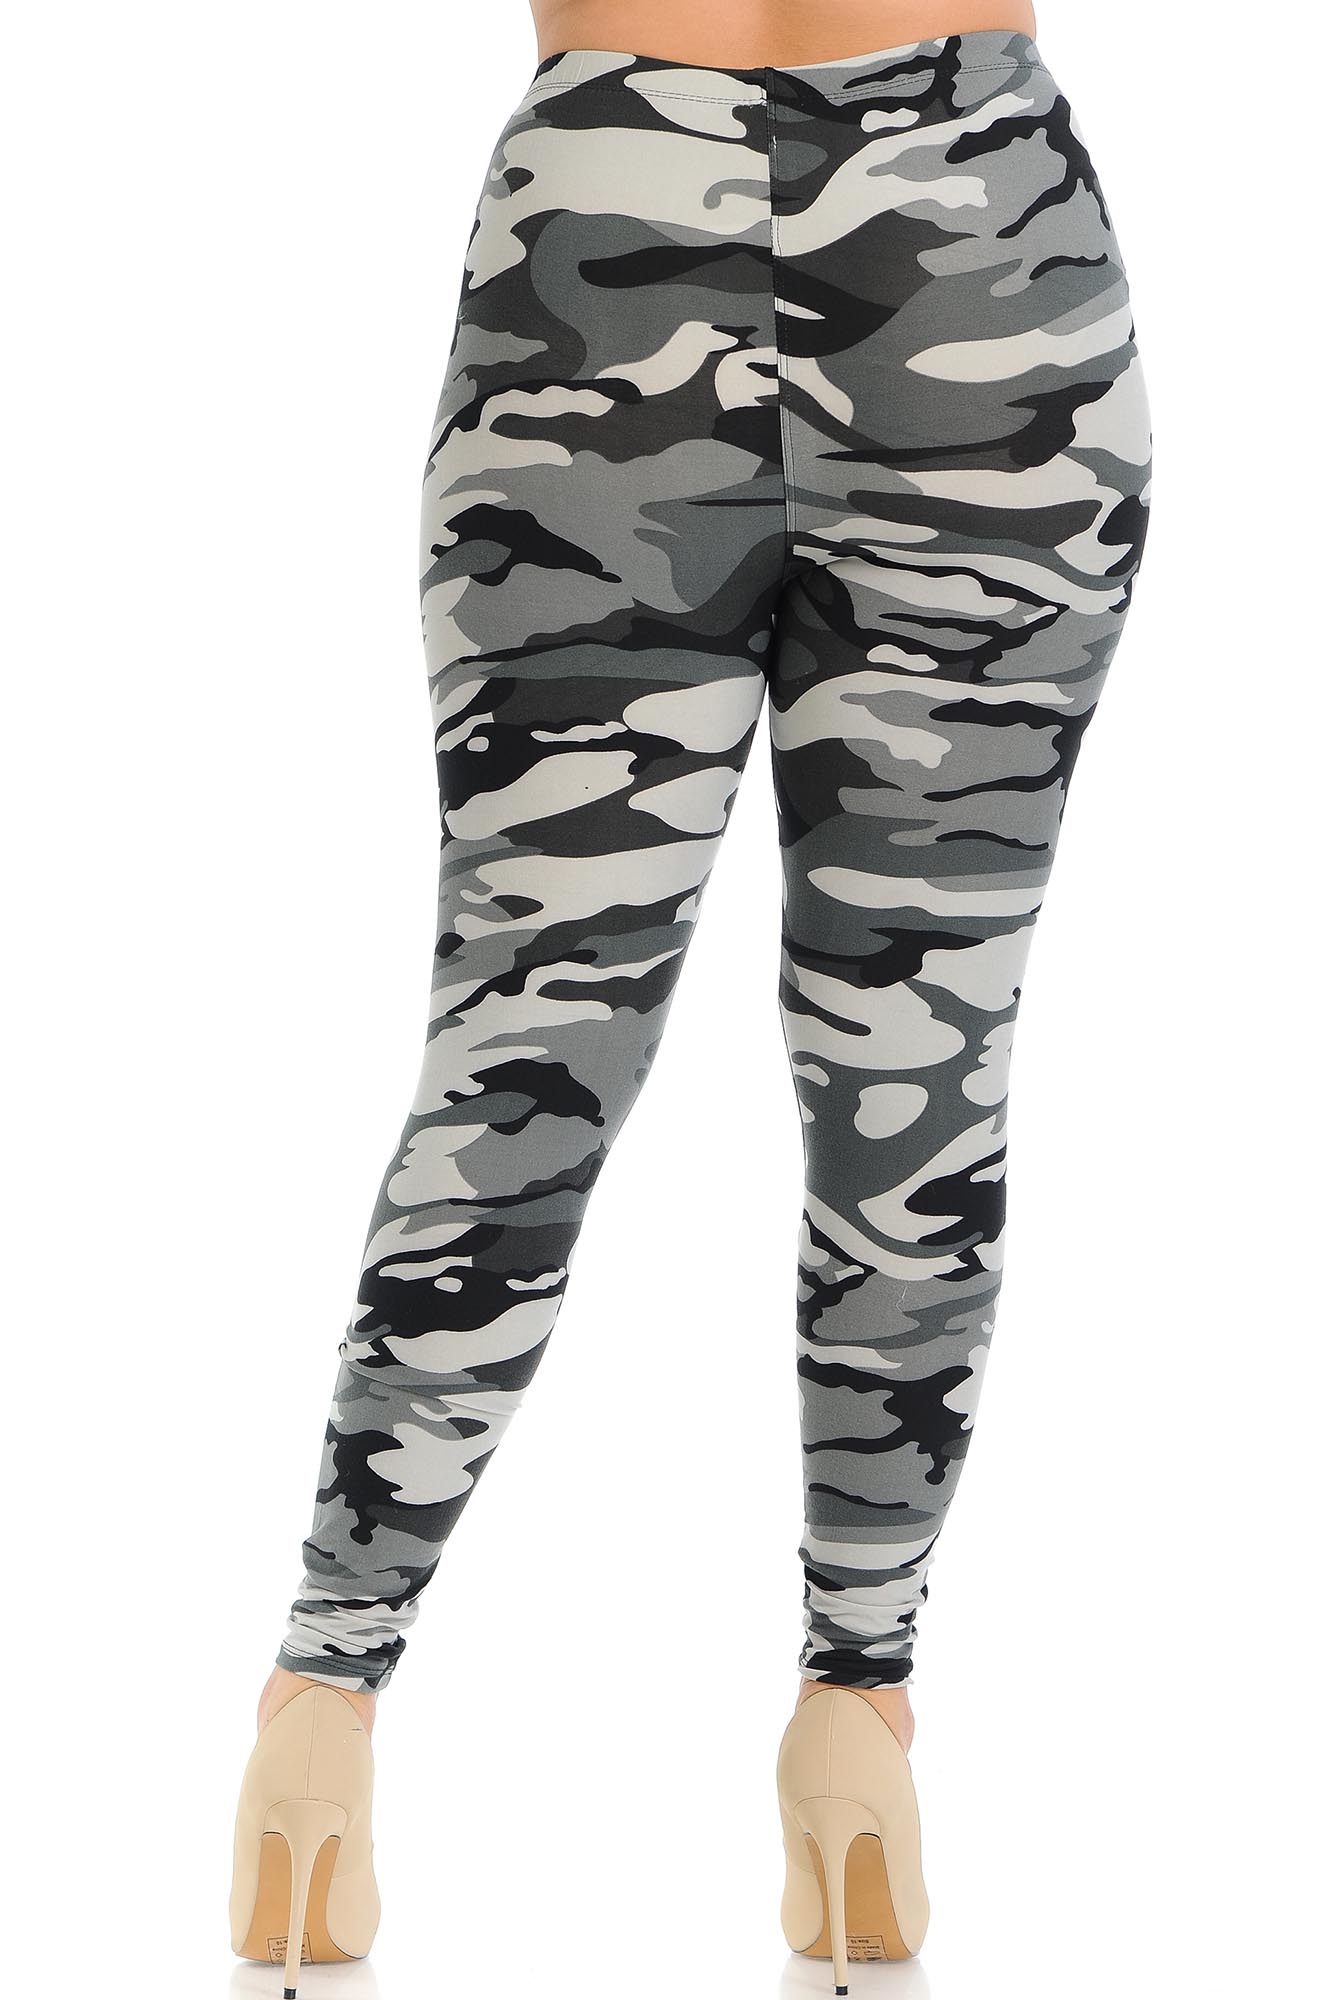 Wholesale Buttery Smooth Charcoal Camouflage Plus Size Leggings - EEVEE